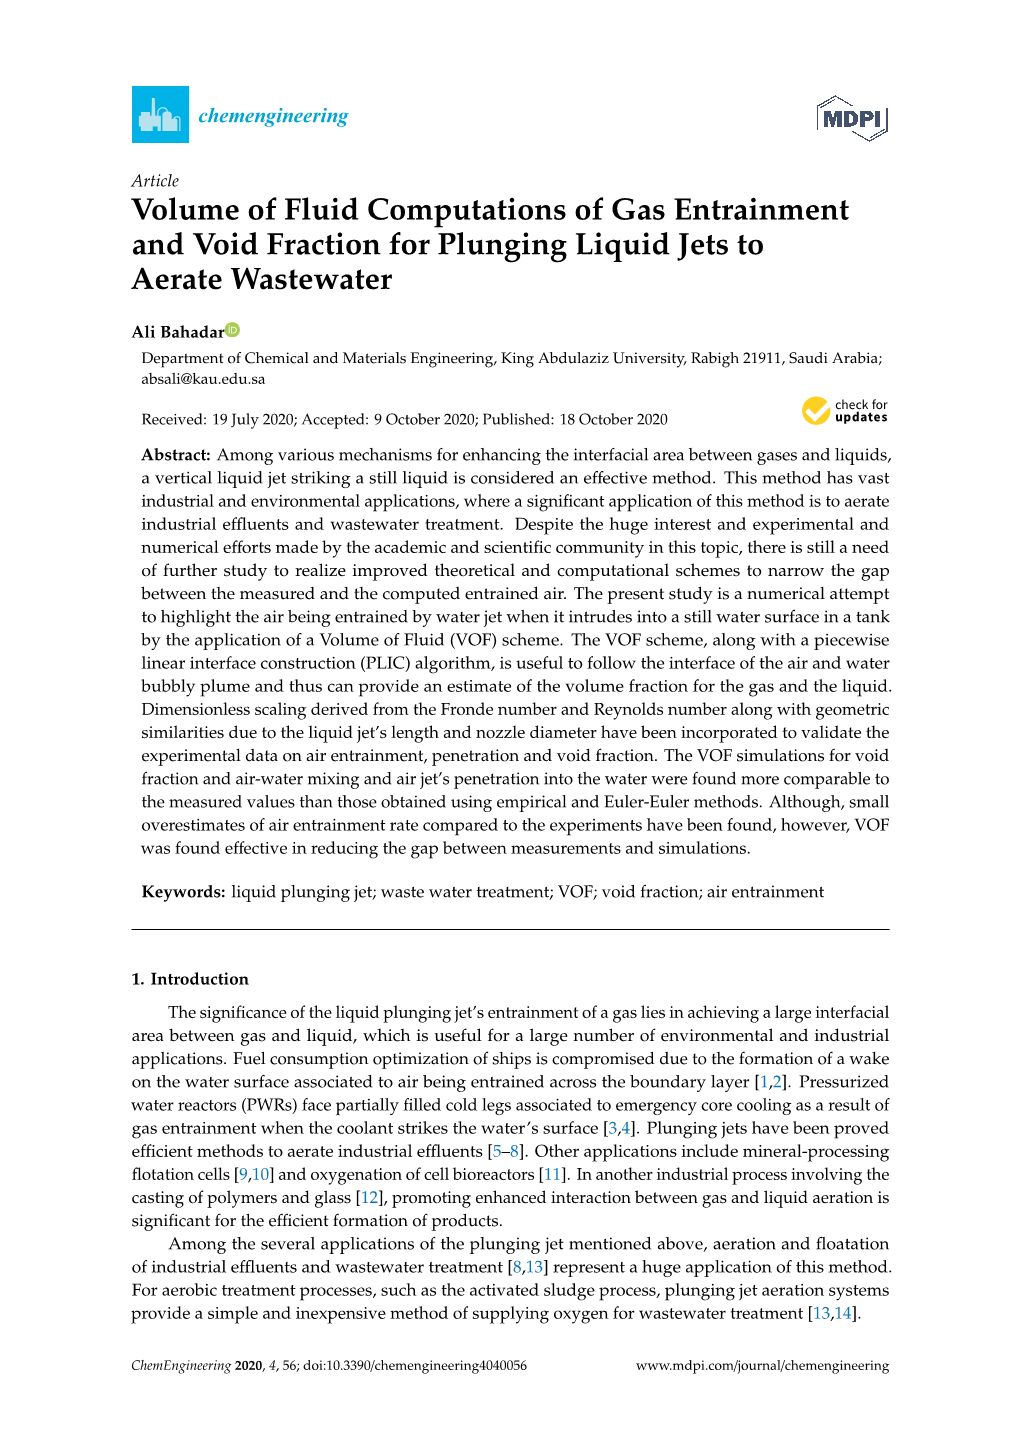 Volume of Fluid Computations of Gas Entrainment and Void Fraction for Plunging Liquid Jets to Aerate Wastewater